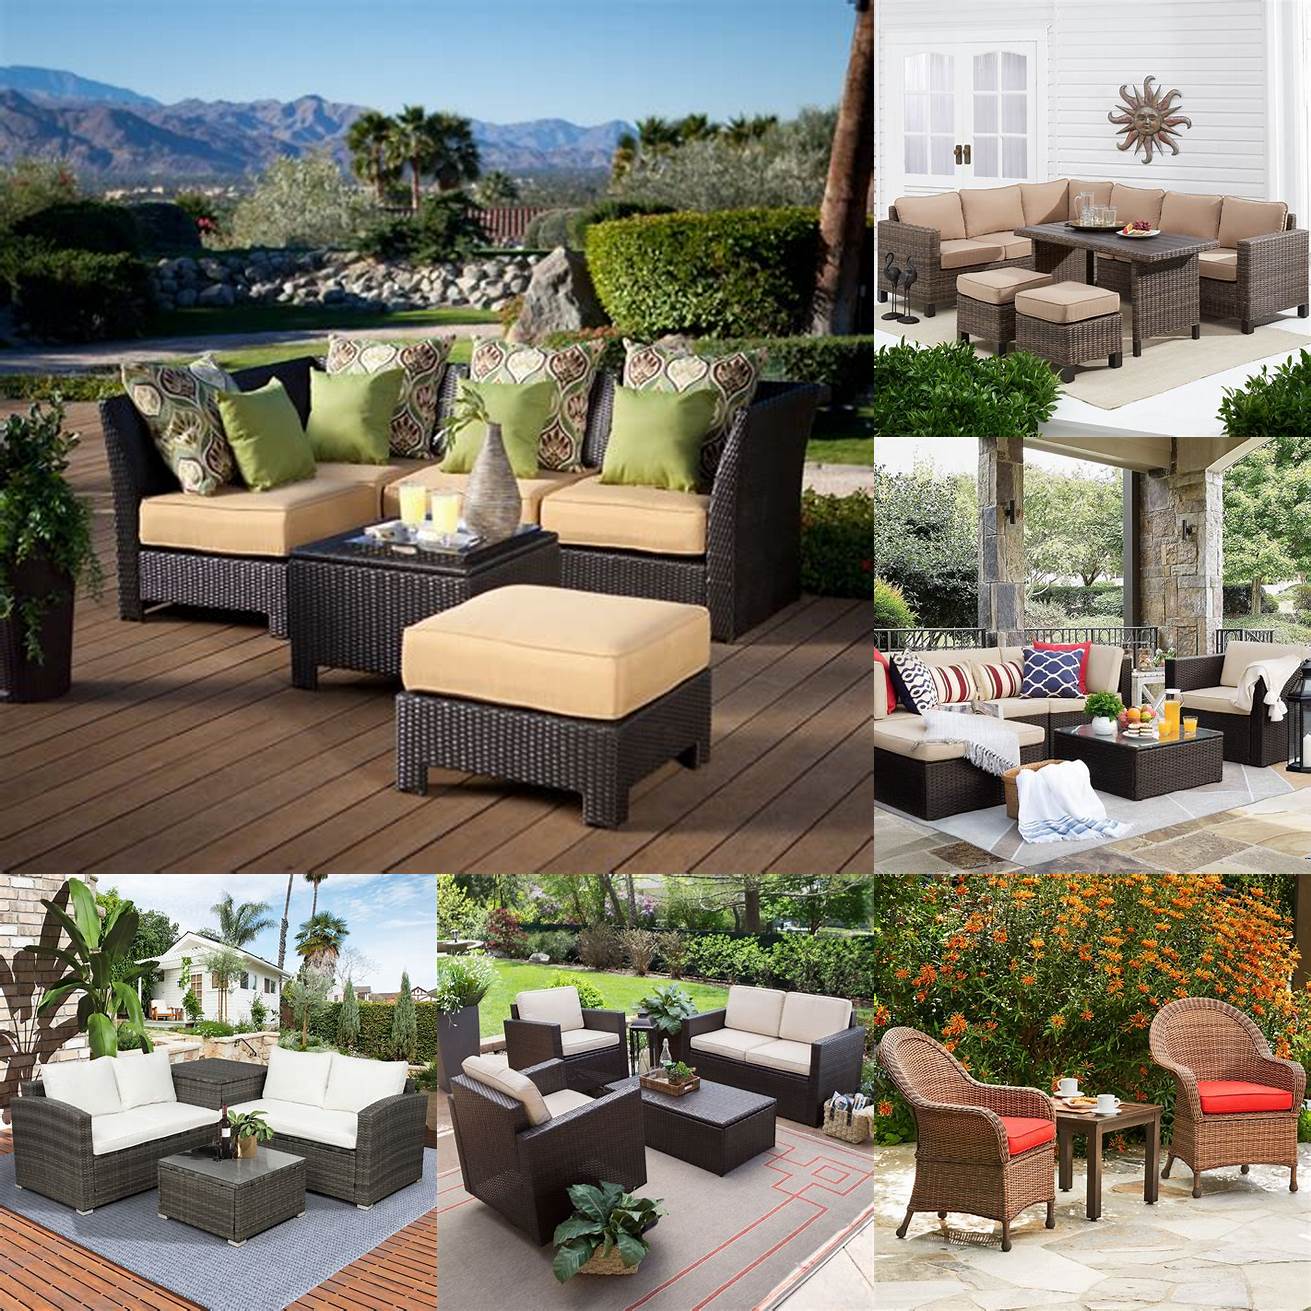 A Group of Patio Furniture